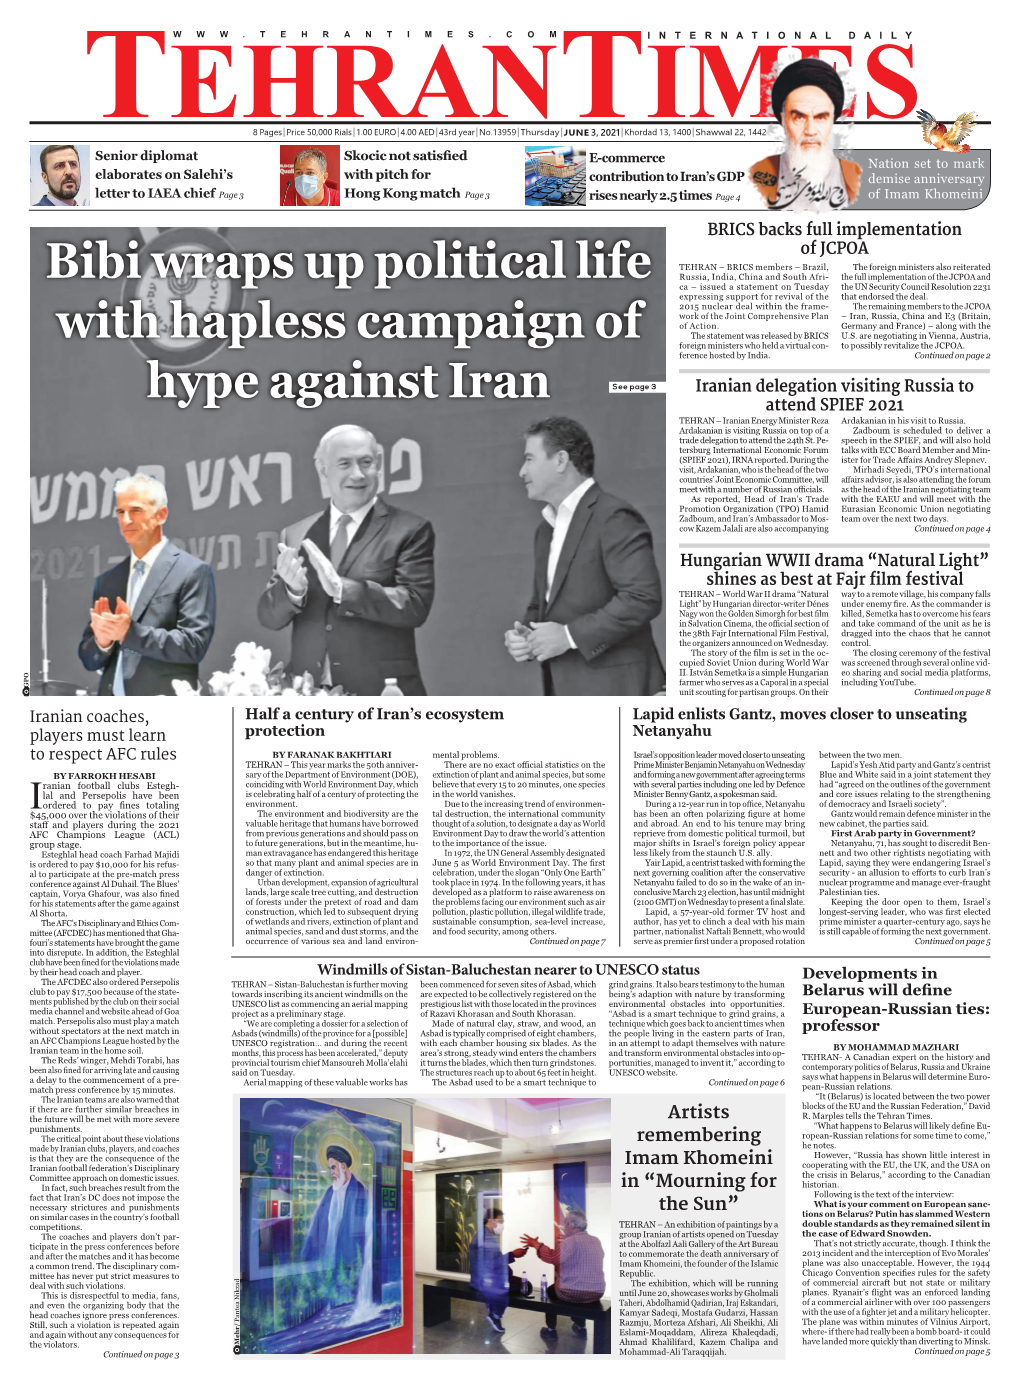 Bibi Wraps up Political Life with Hapless Campaign of Hype Against Iran